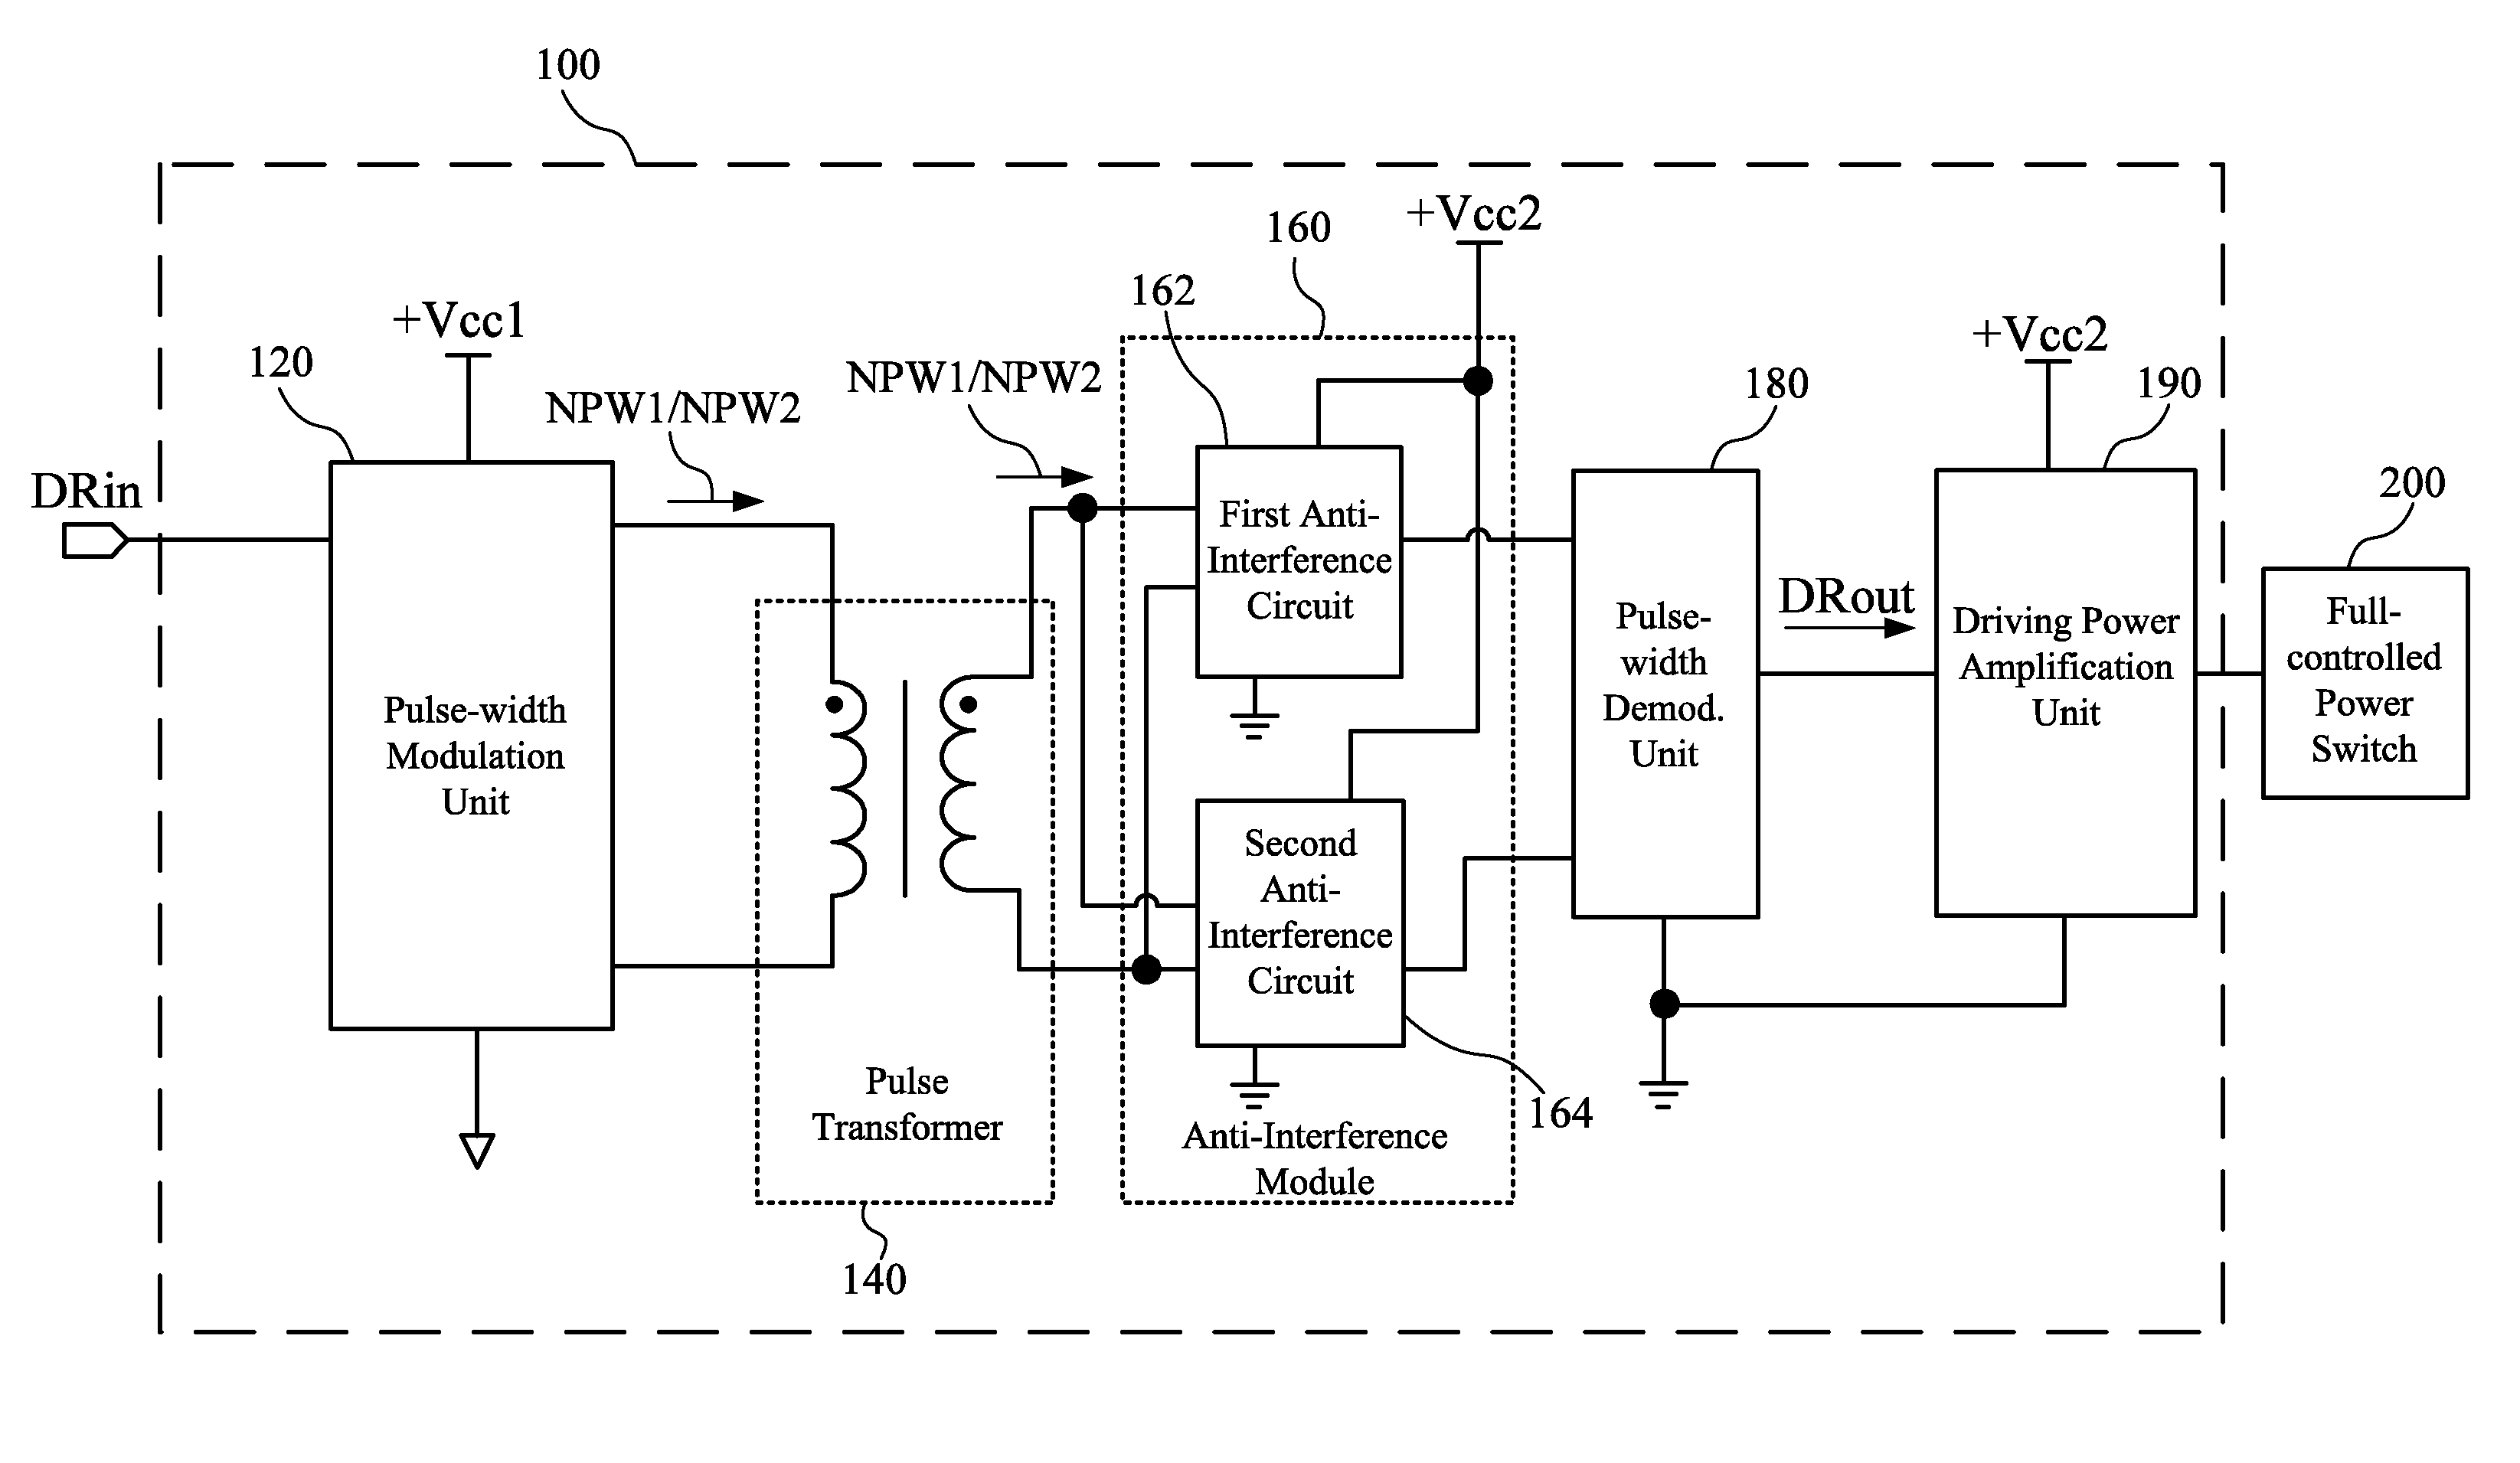 Switch driving circuit